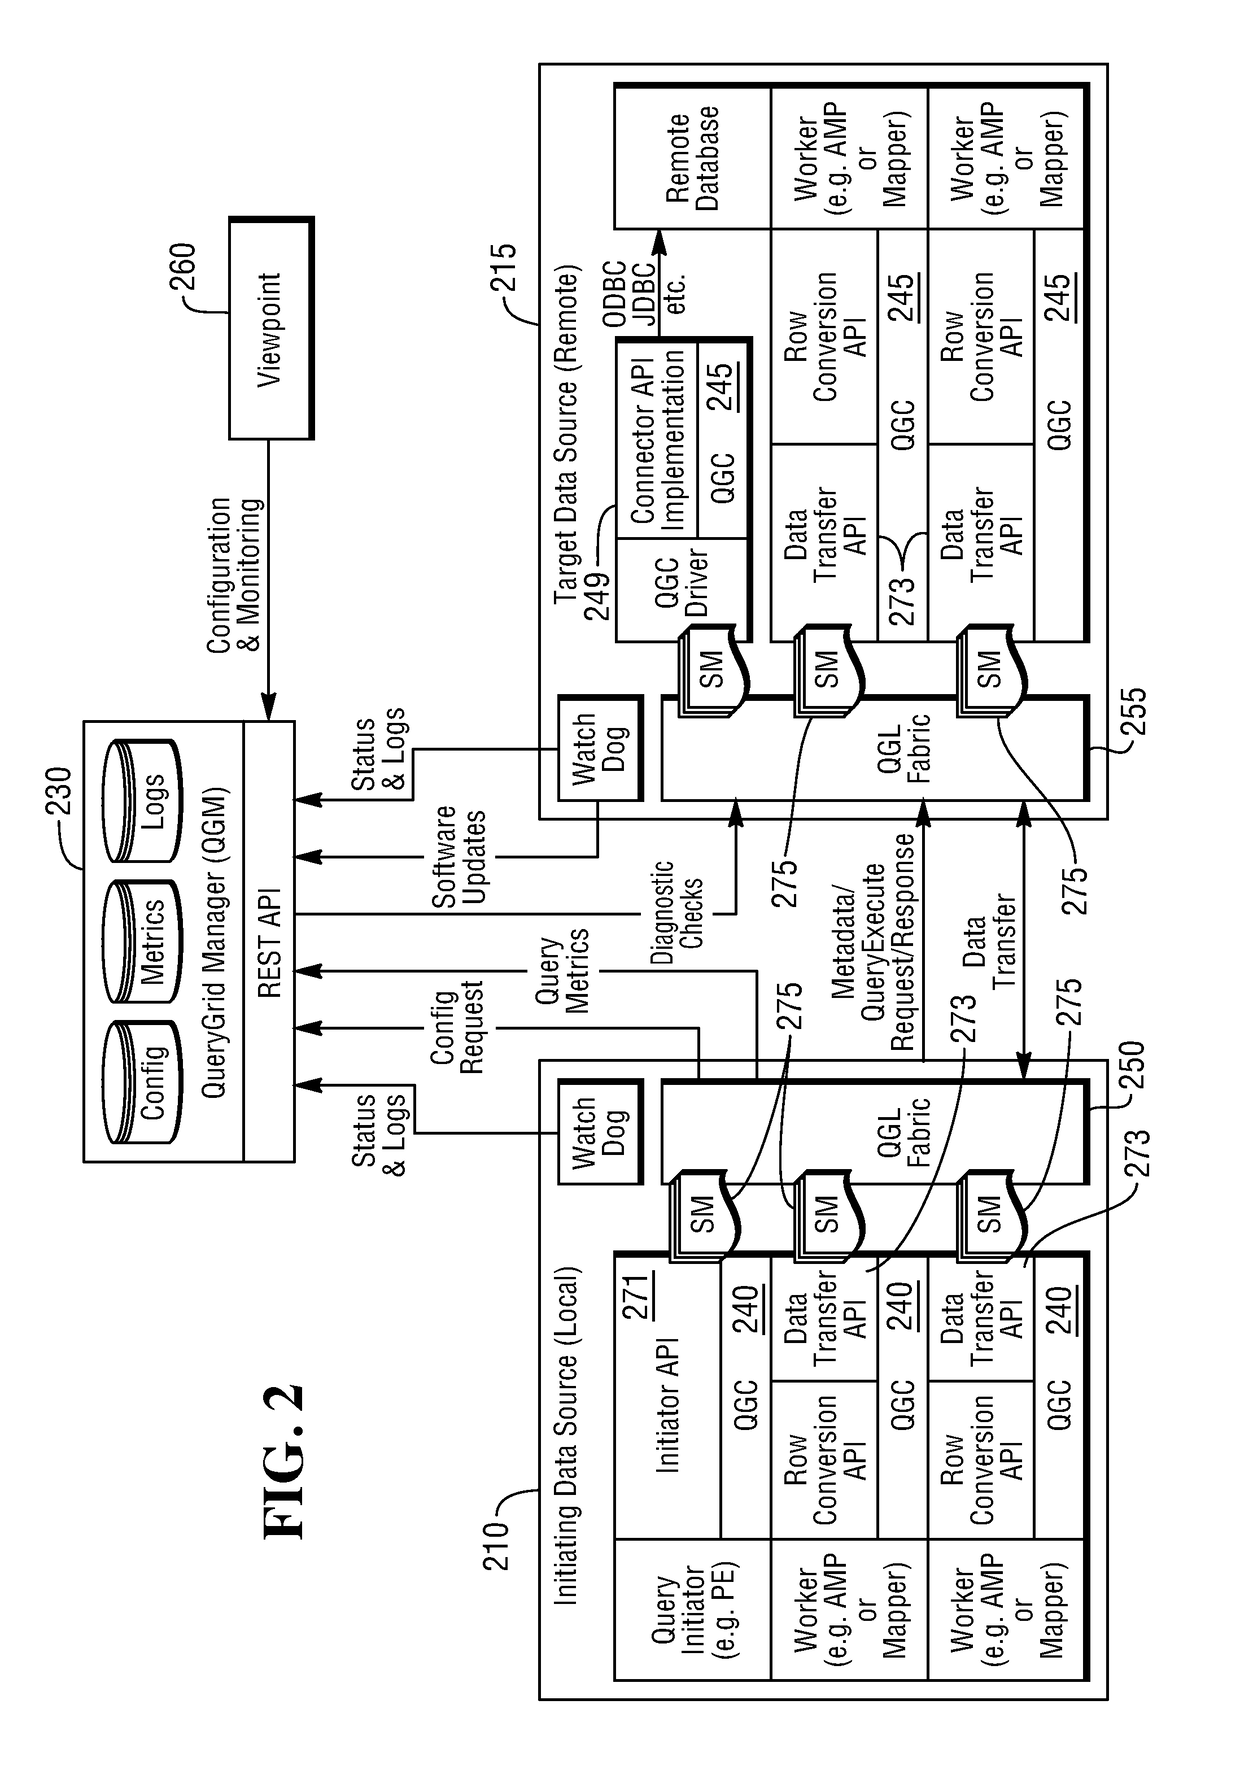 Method and system for providing data access and local processing across disparate data systems